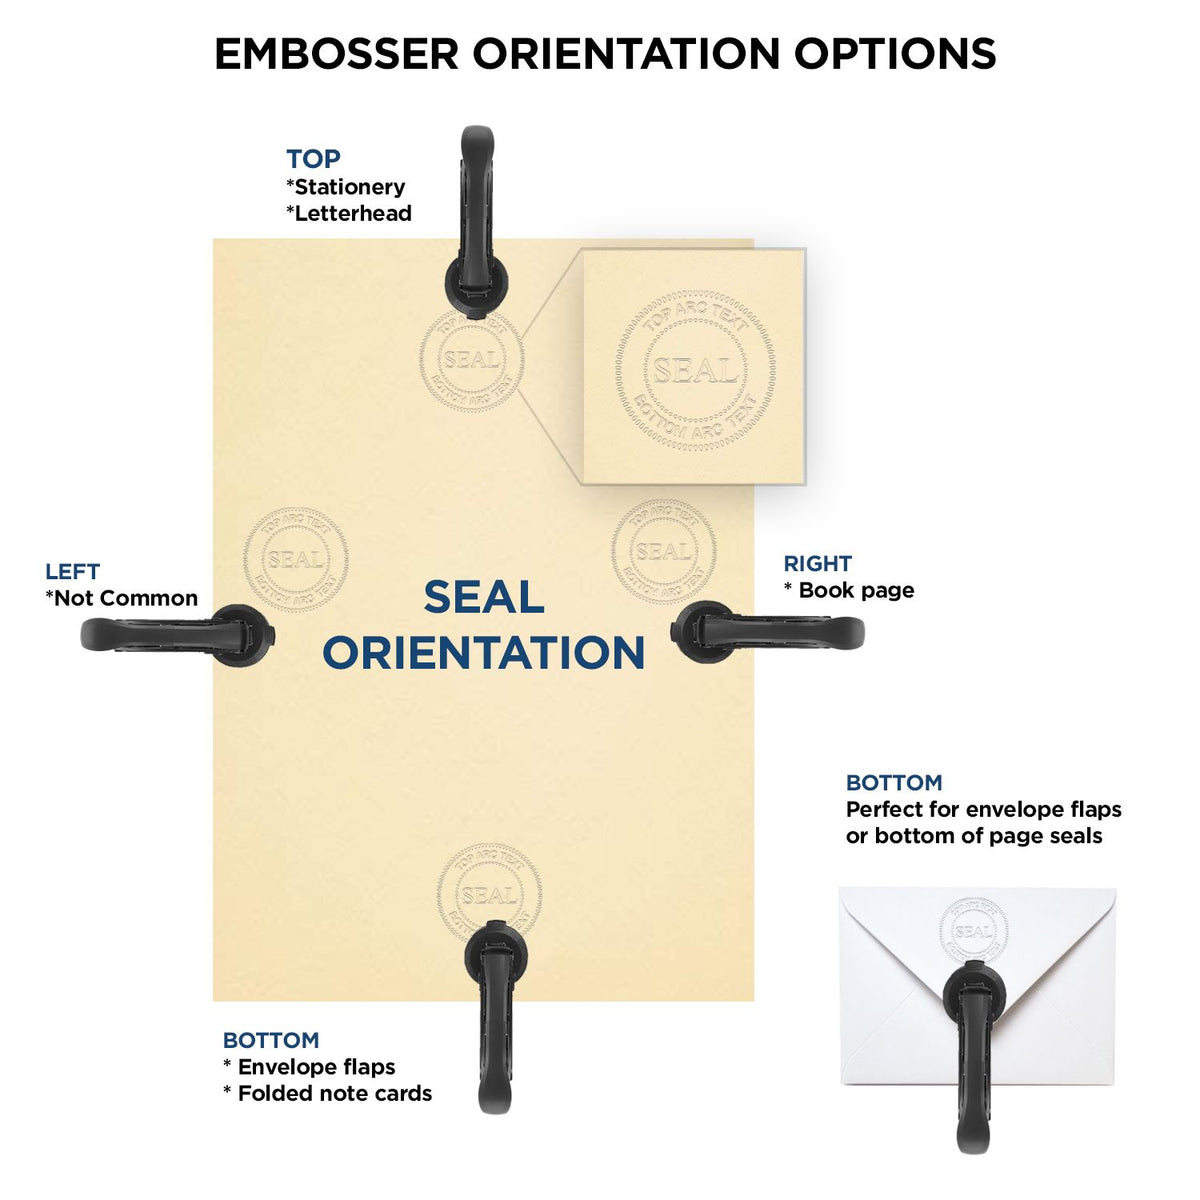 An infographic for the Handheld Iowa Professional Geologist Embosser showing embosser orientation, this is showing examples of a top, bottom, right and left insert.